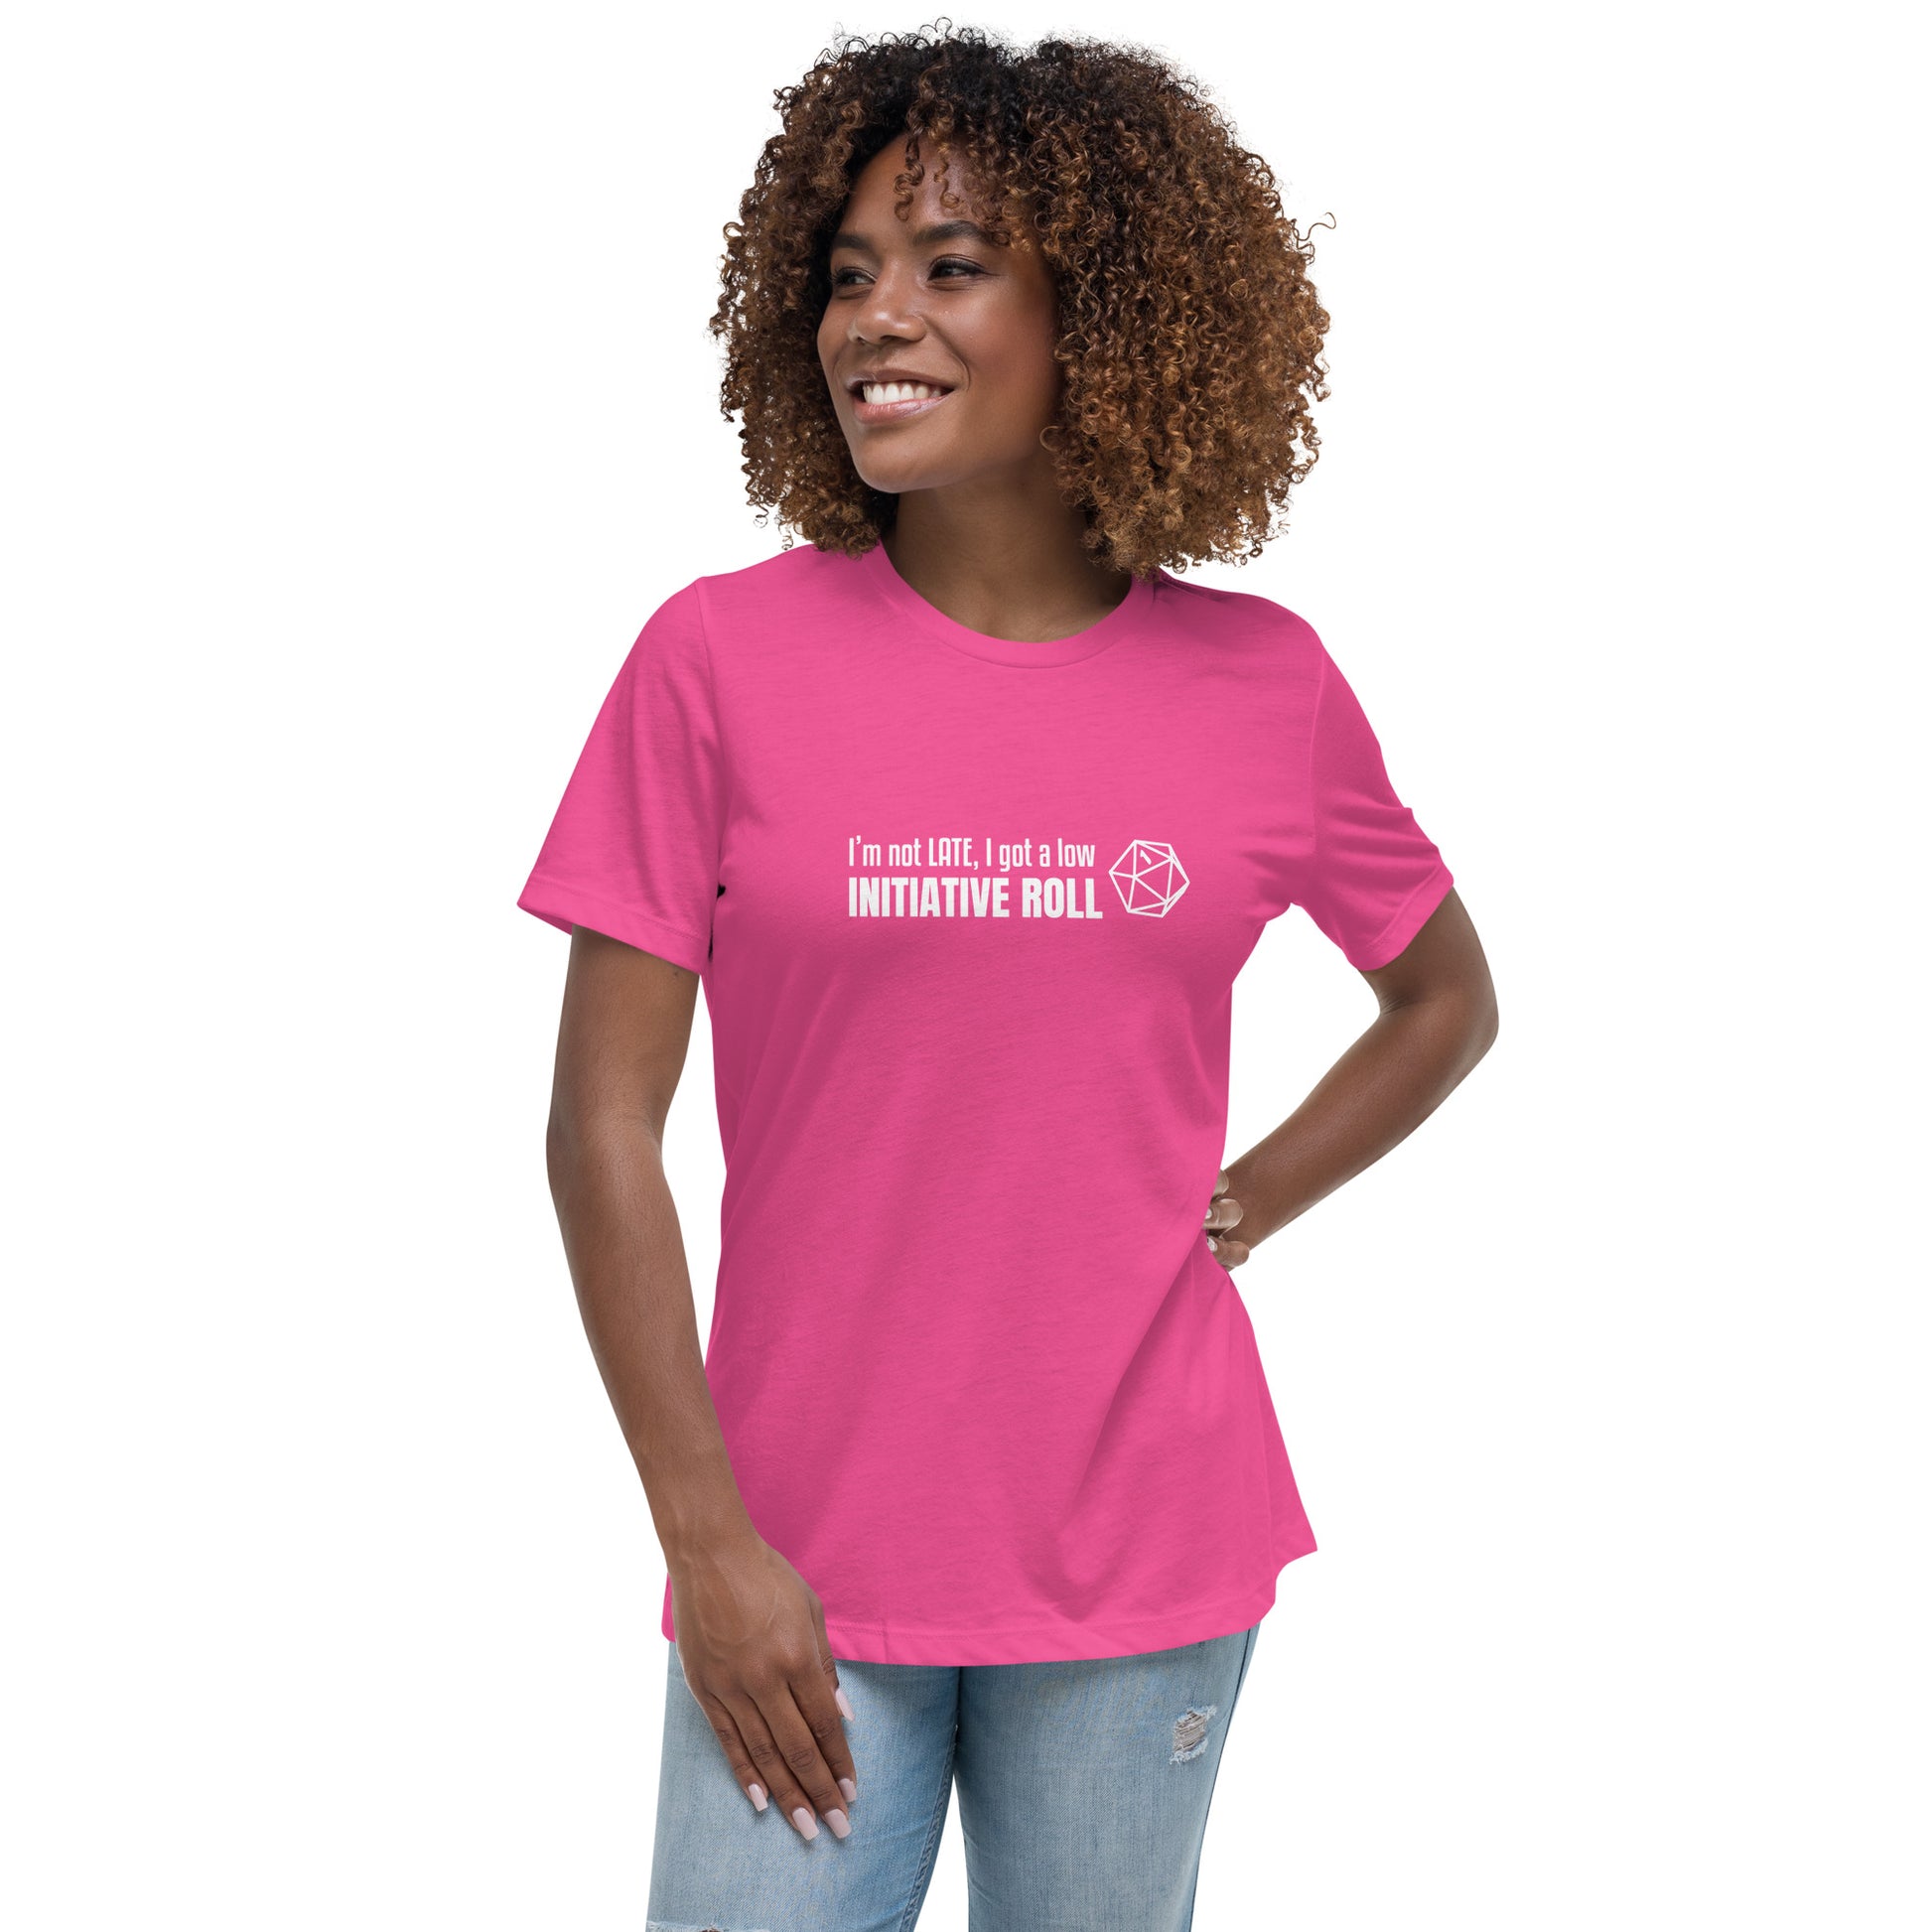 Female model wearing Berry (magenta) women's relaxed-fit t-shirt with a graphic of a d20 (twenty-sided die) showing a roll of "1" and text: "I'm not LATE, I got a low INITIATIVE ROLL"